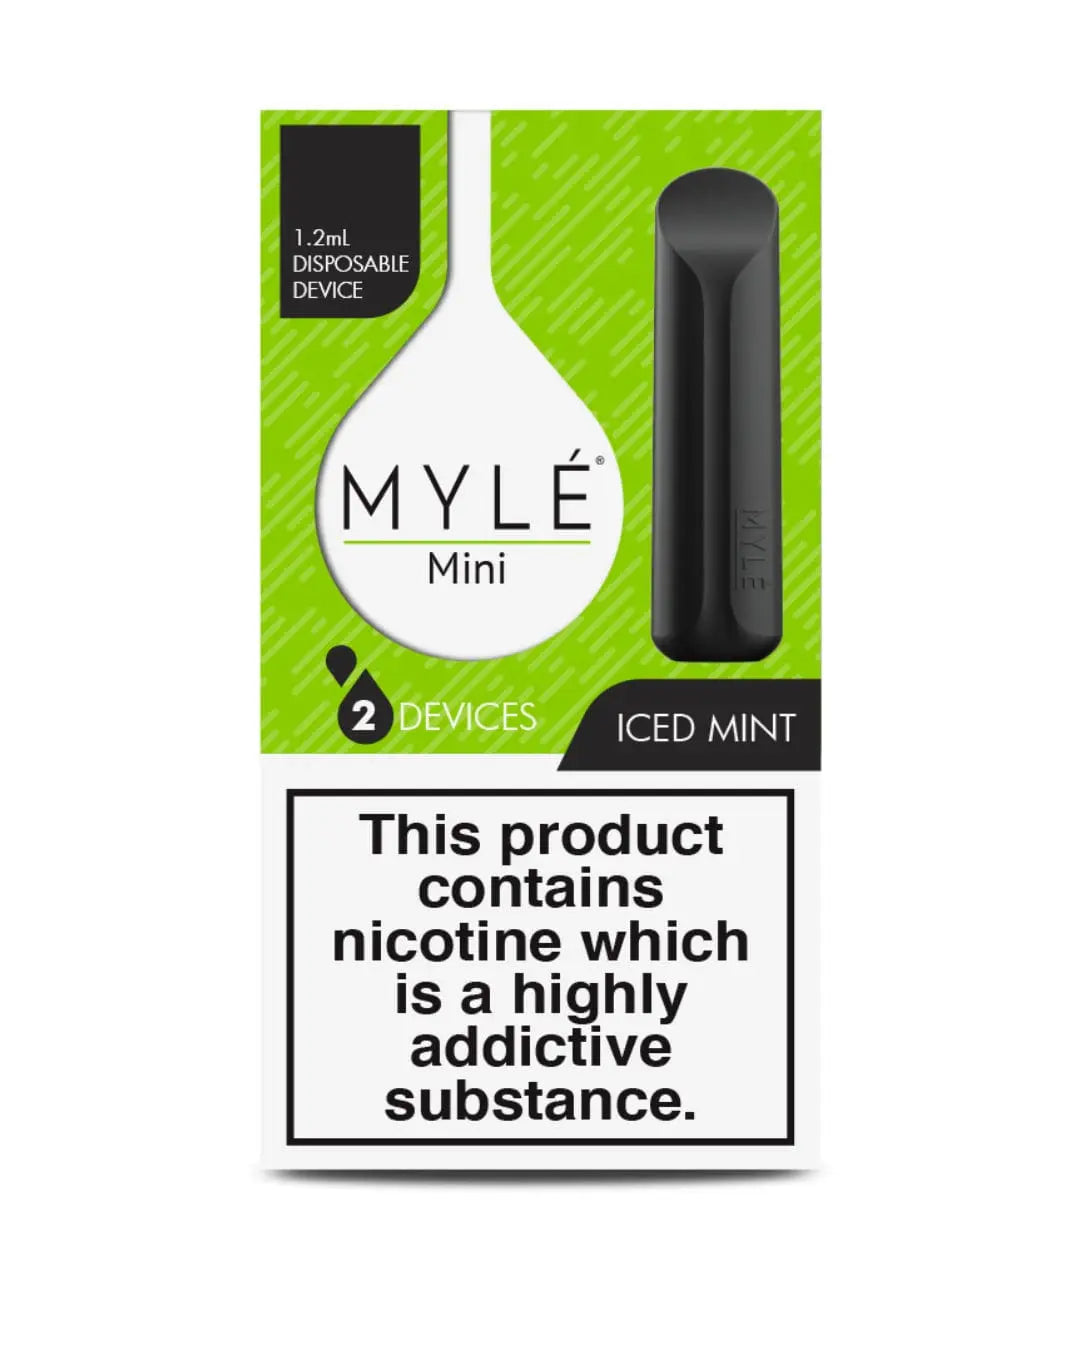 Iced Mint - Mini Myle - Pack of 2 Devices Disposable Vapes